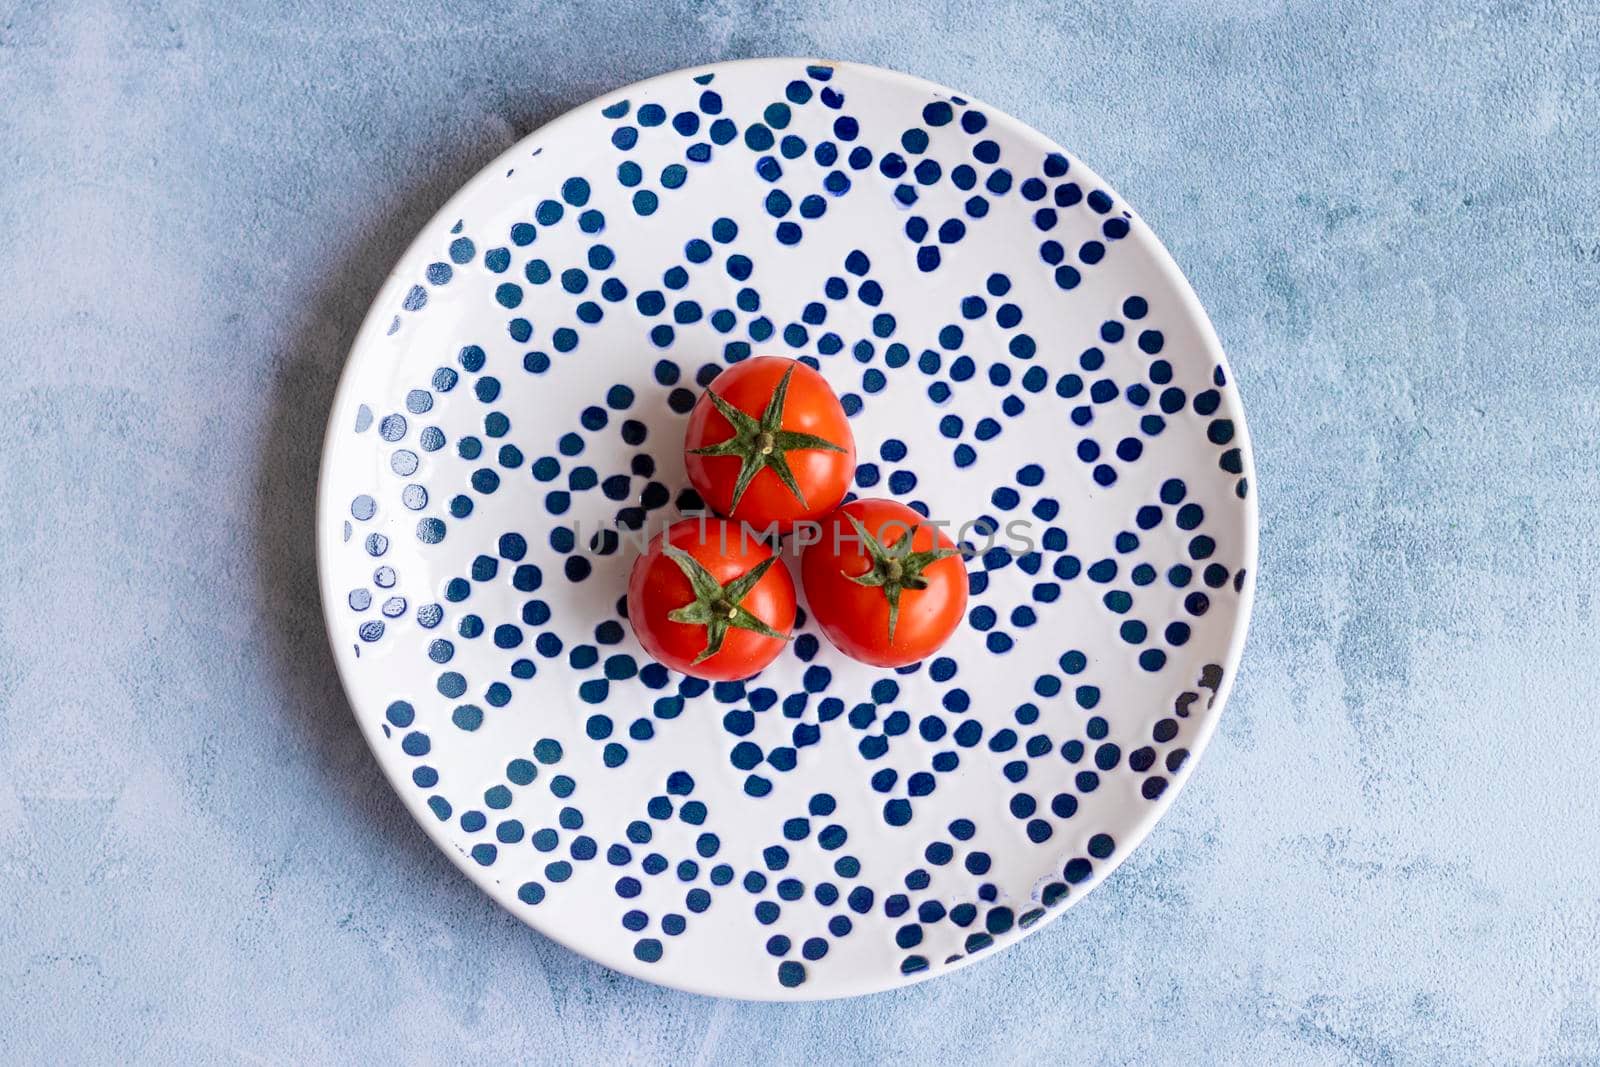 Cherry tomatoes on blue dotted plate by eagg13